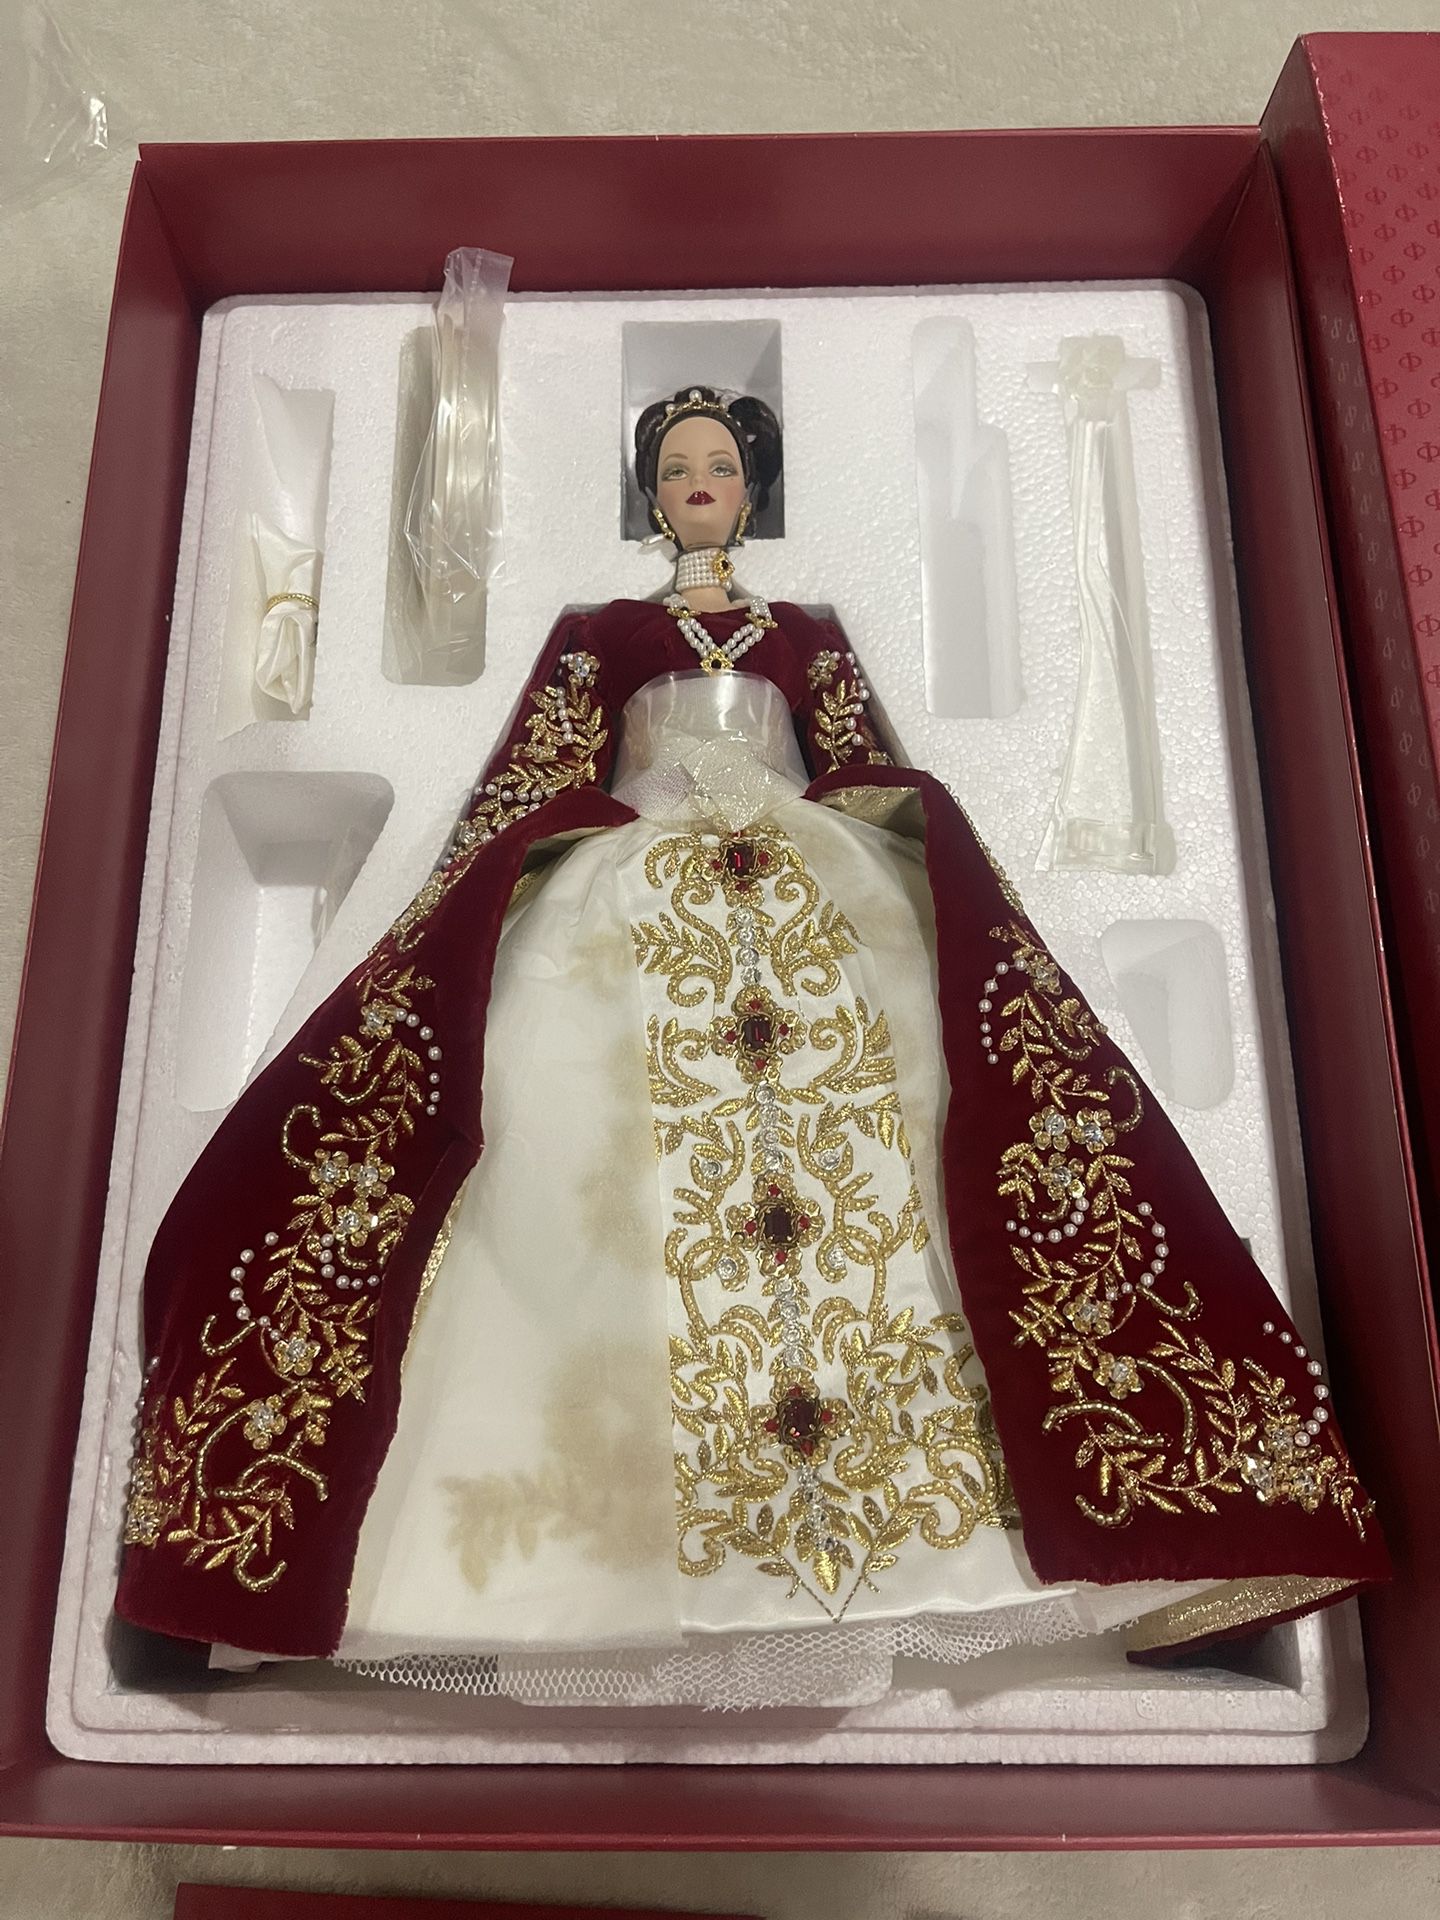 Barbie Limited Edition Faberge Imperial Splendor Porcelain new in box Mint Cond